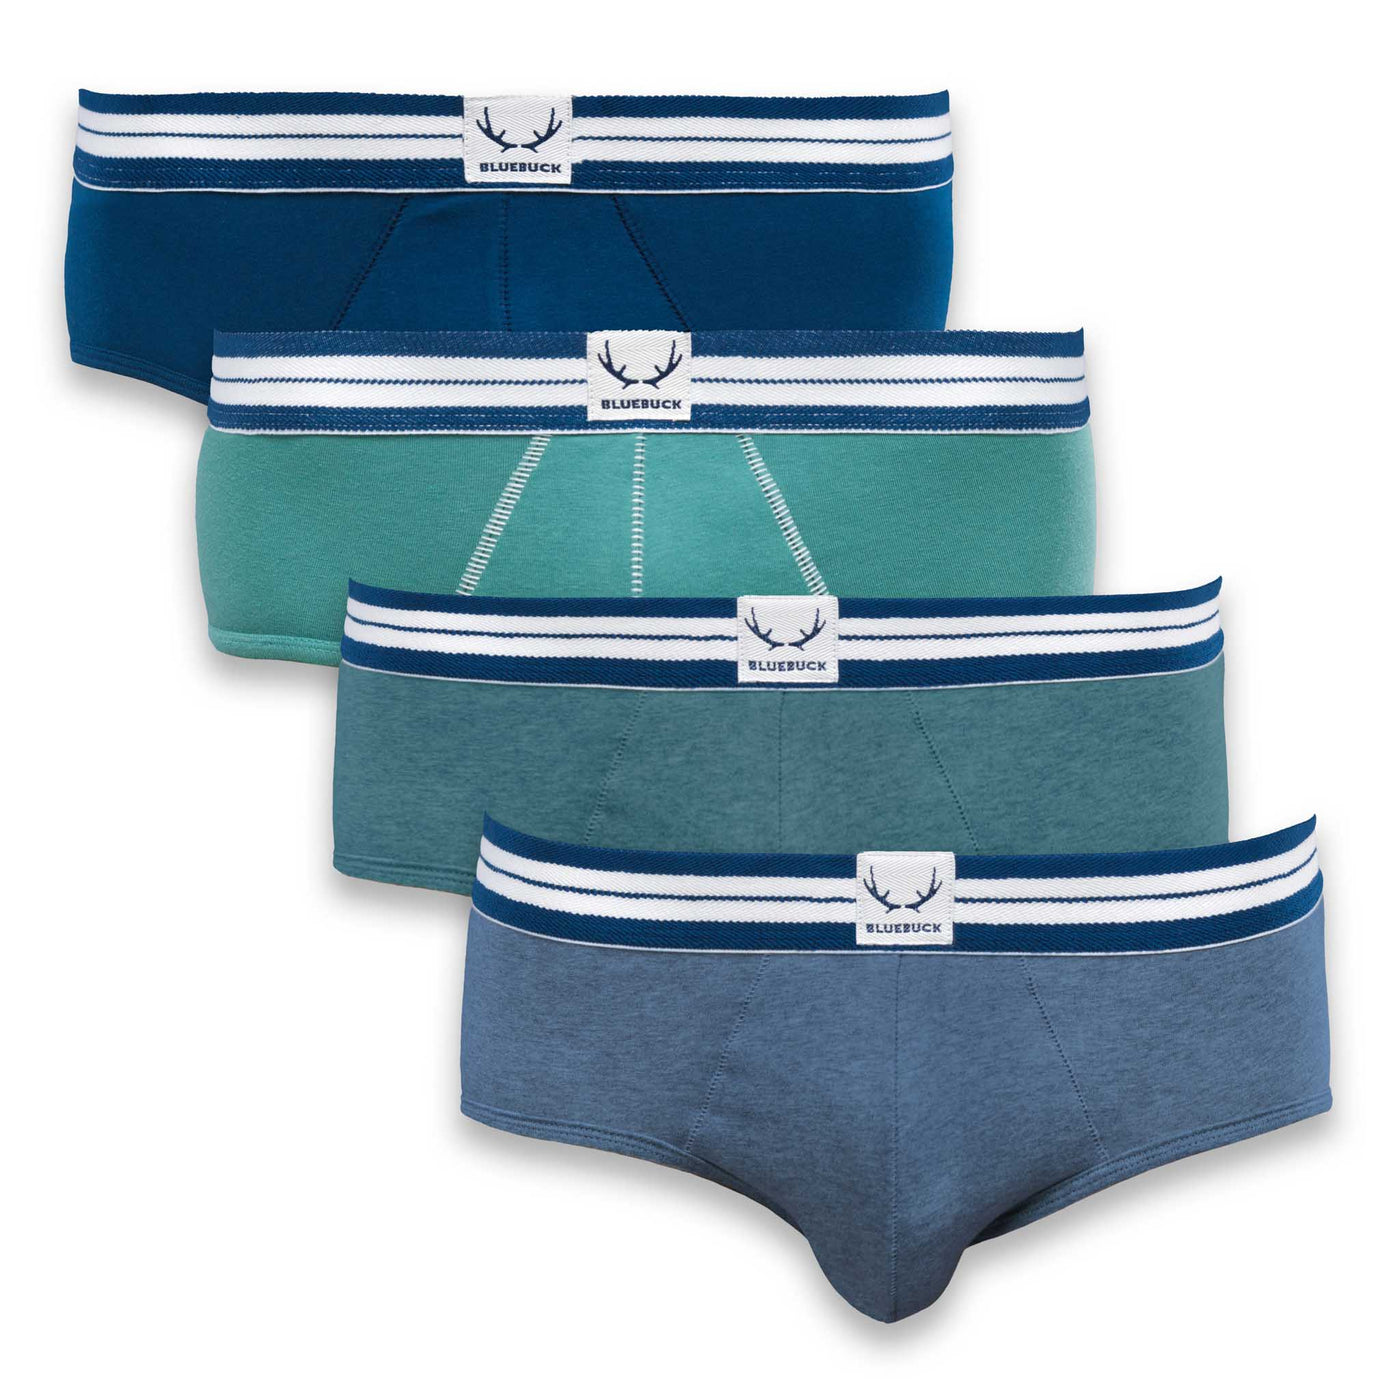 4 classic briefs in blue and green in organic cotton